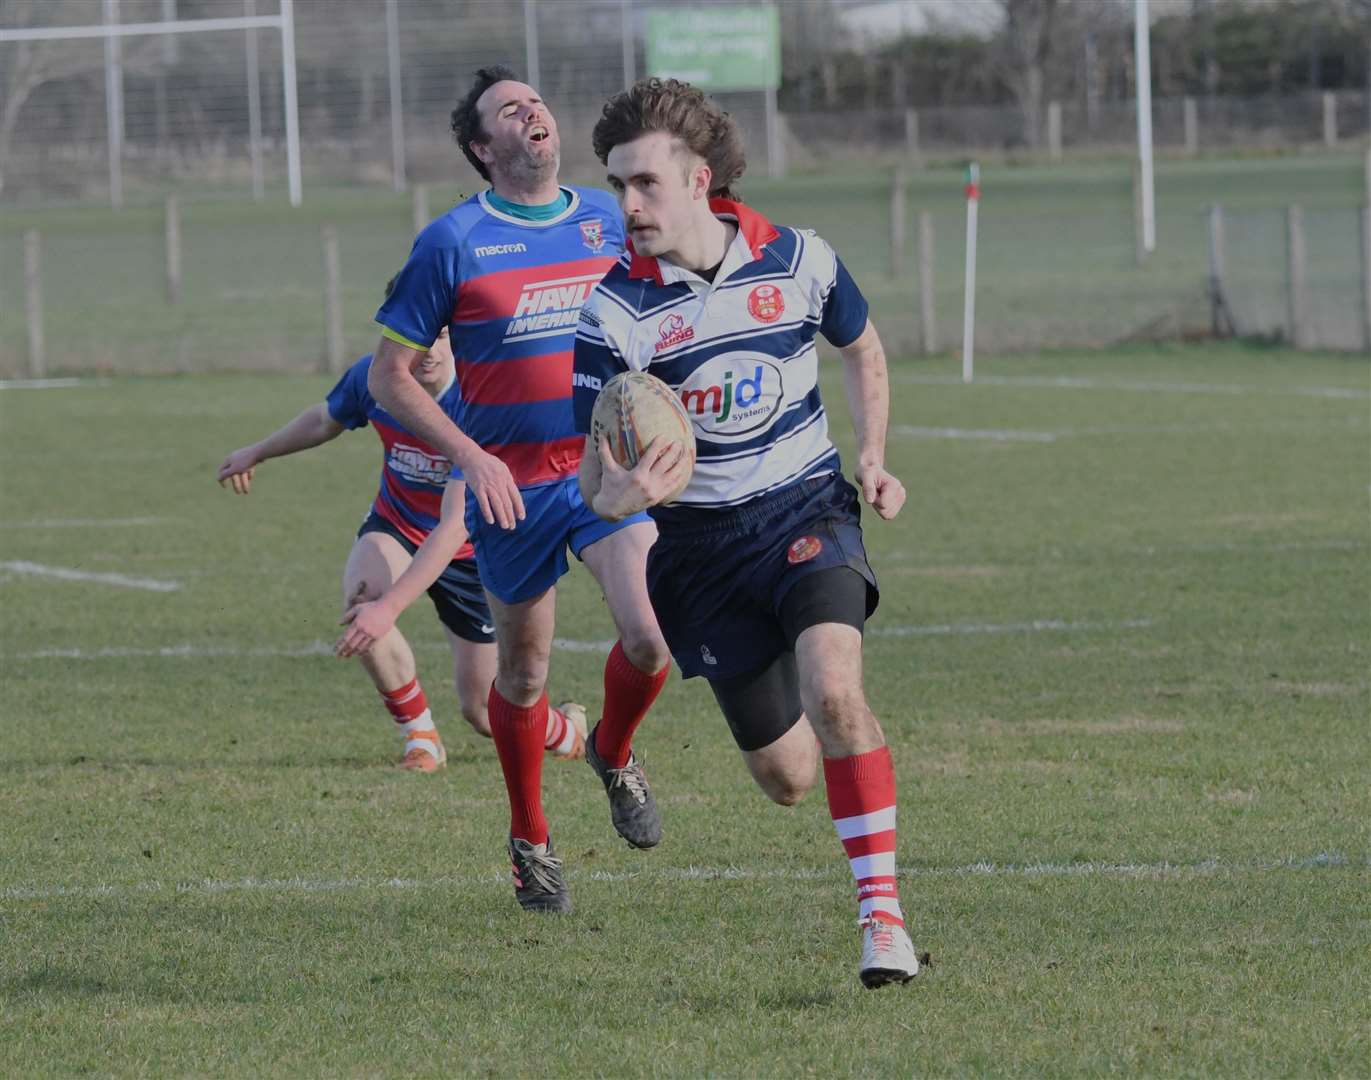 Ed Walling celebrates scoring a try. Picture: James Officer